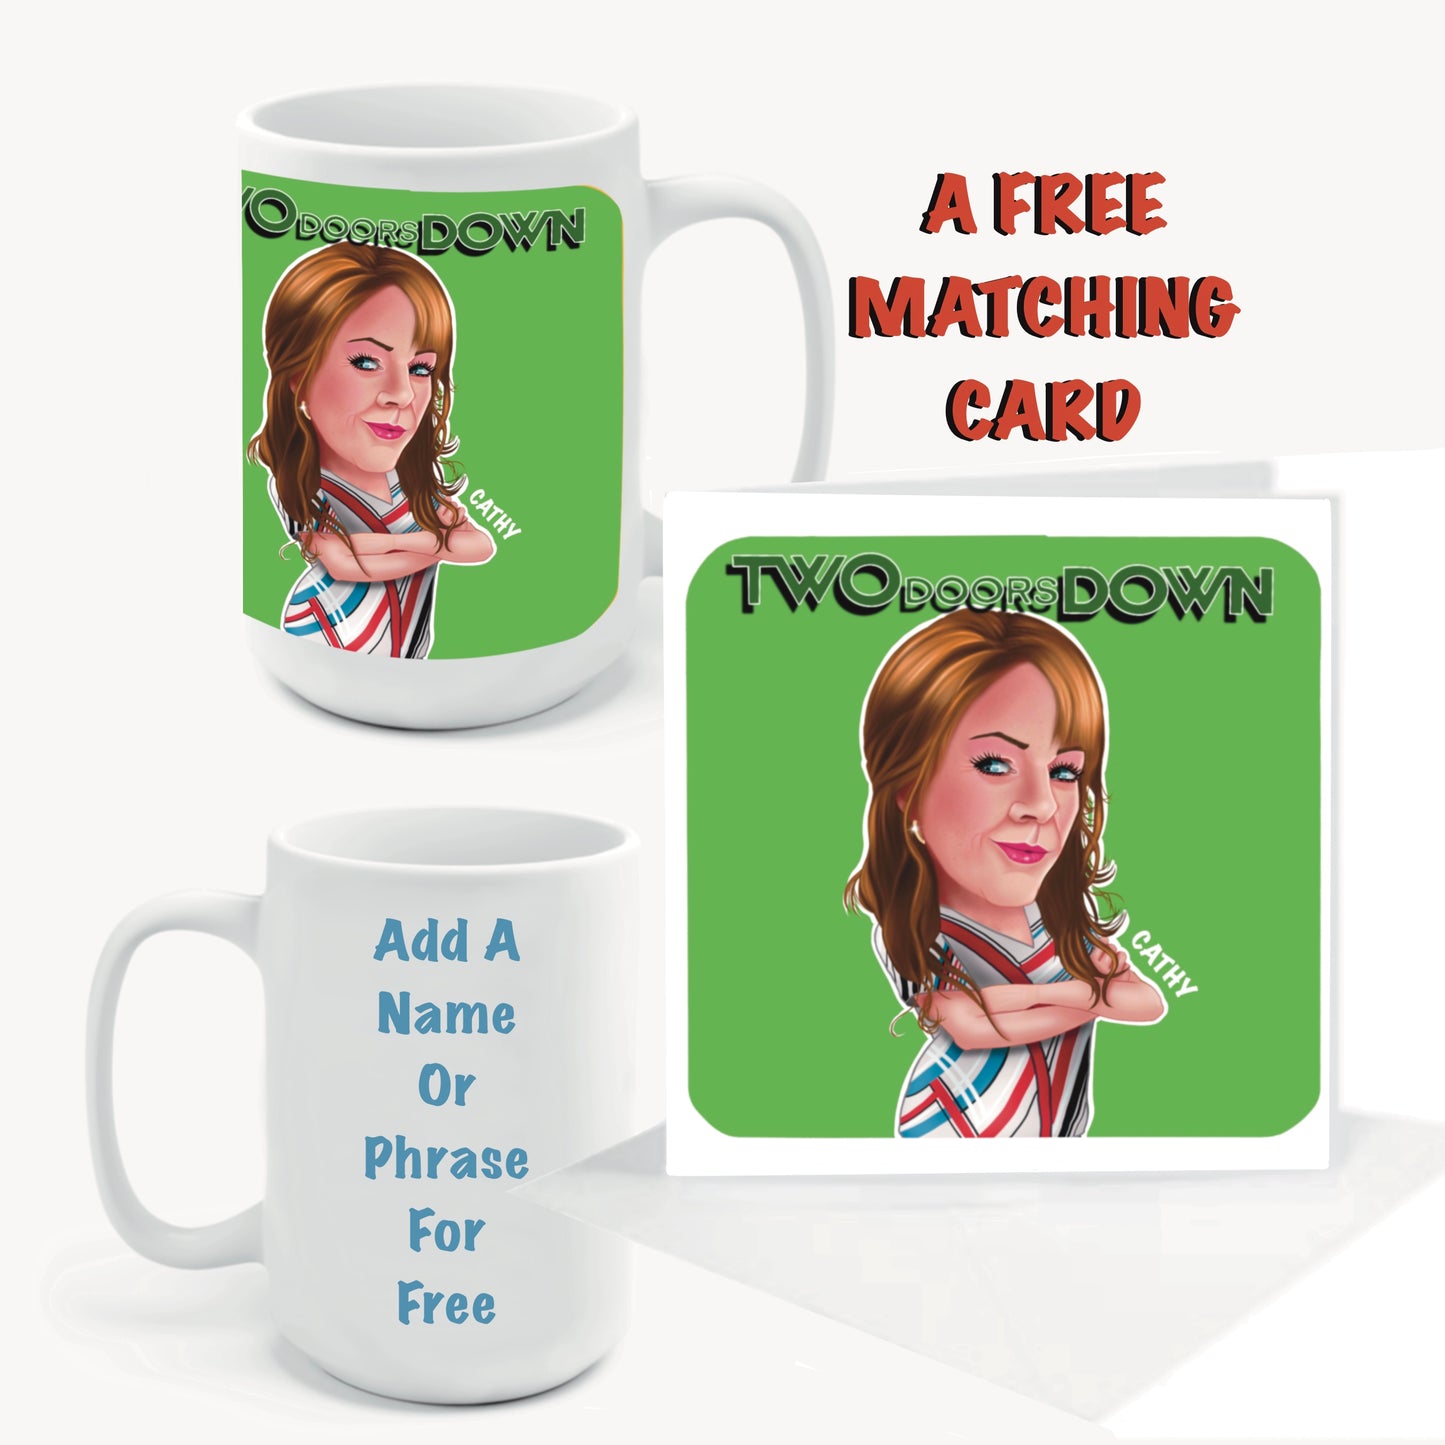 Two Doors Down Mugs-Mugs and get a FREE Cards-Cards